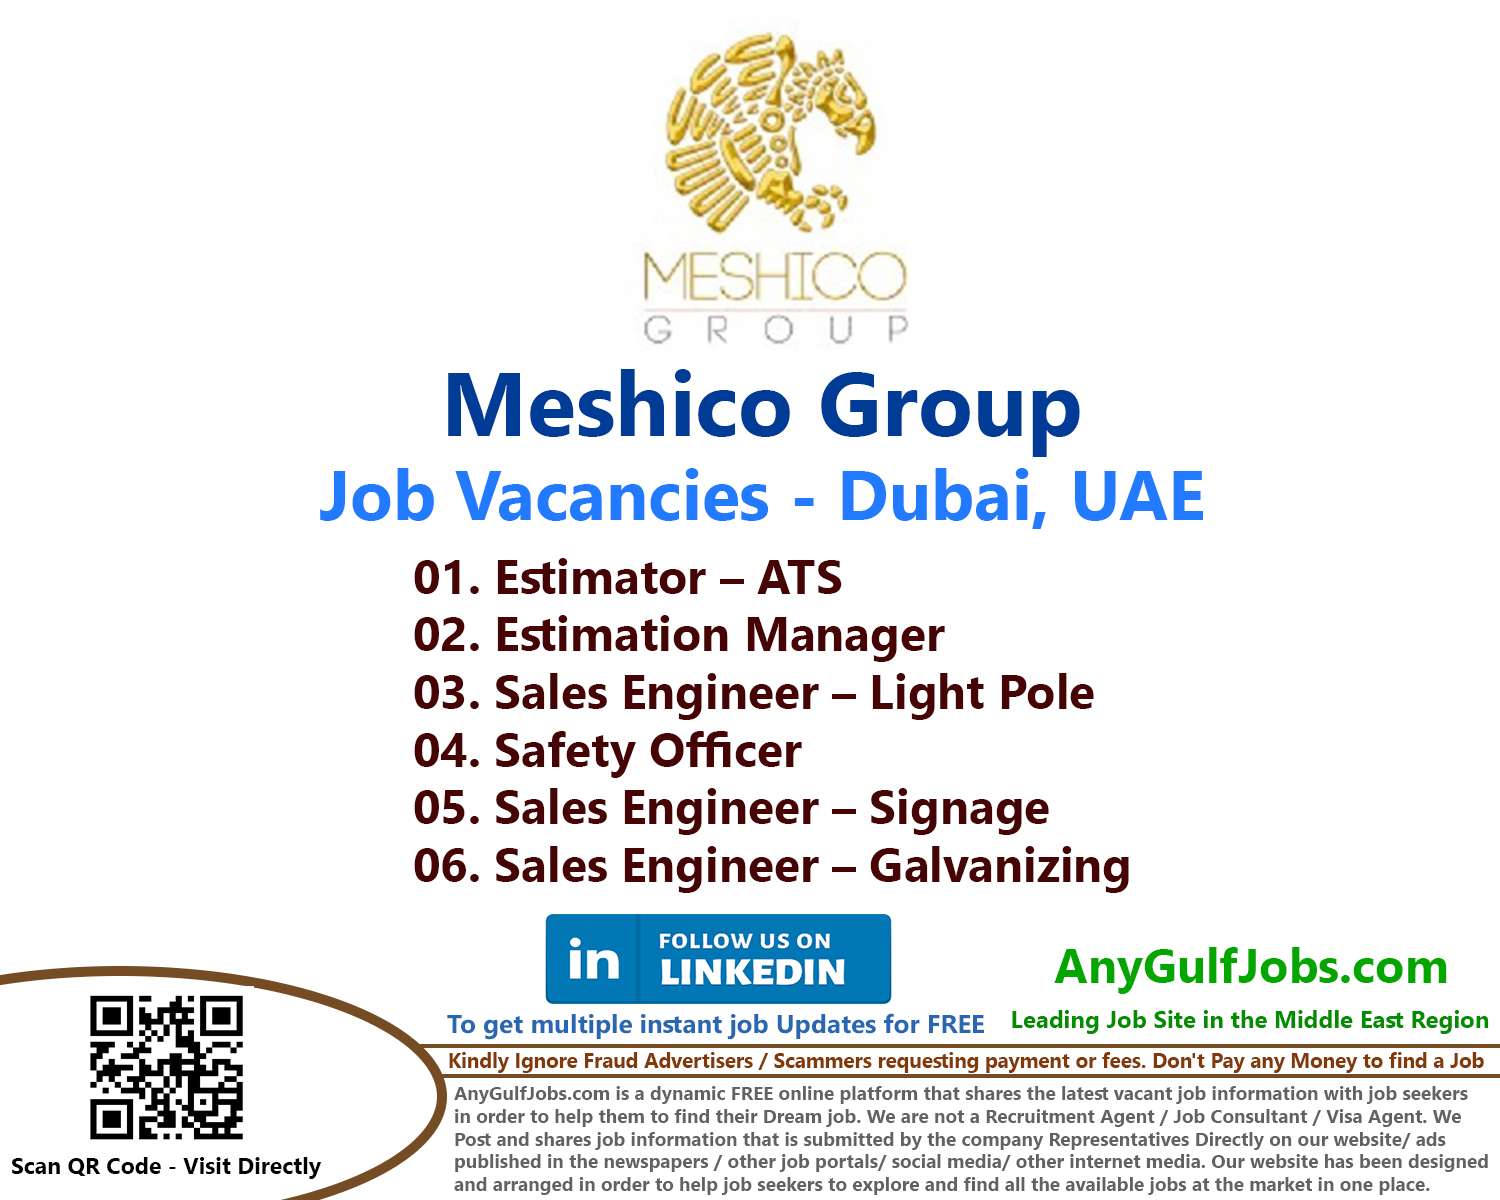 Meshico Group Job Vacancies - Dubai, UAE, And Also We are going to describe to you the ways to get a job in Meshico Group - Dubai, UAE.